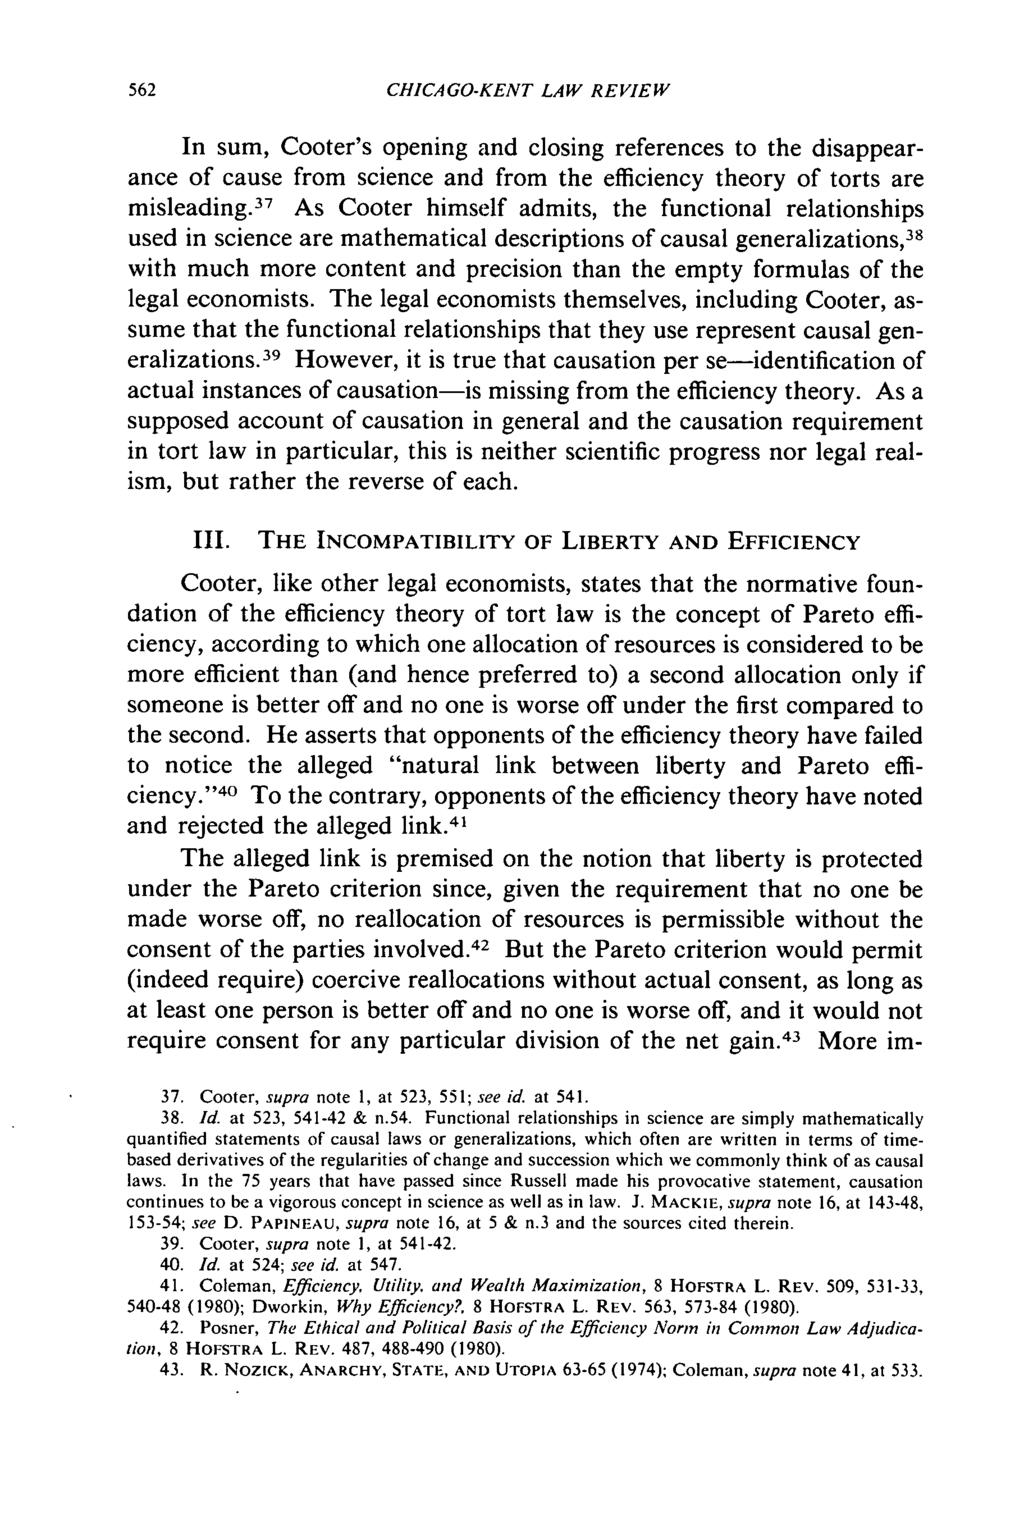 CHICAGO-KENT LAW REVIEW In sum, Cooter's opening and closing references to the disappearance of cause from science and from the efficiency theory of torts are misleading.